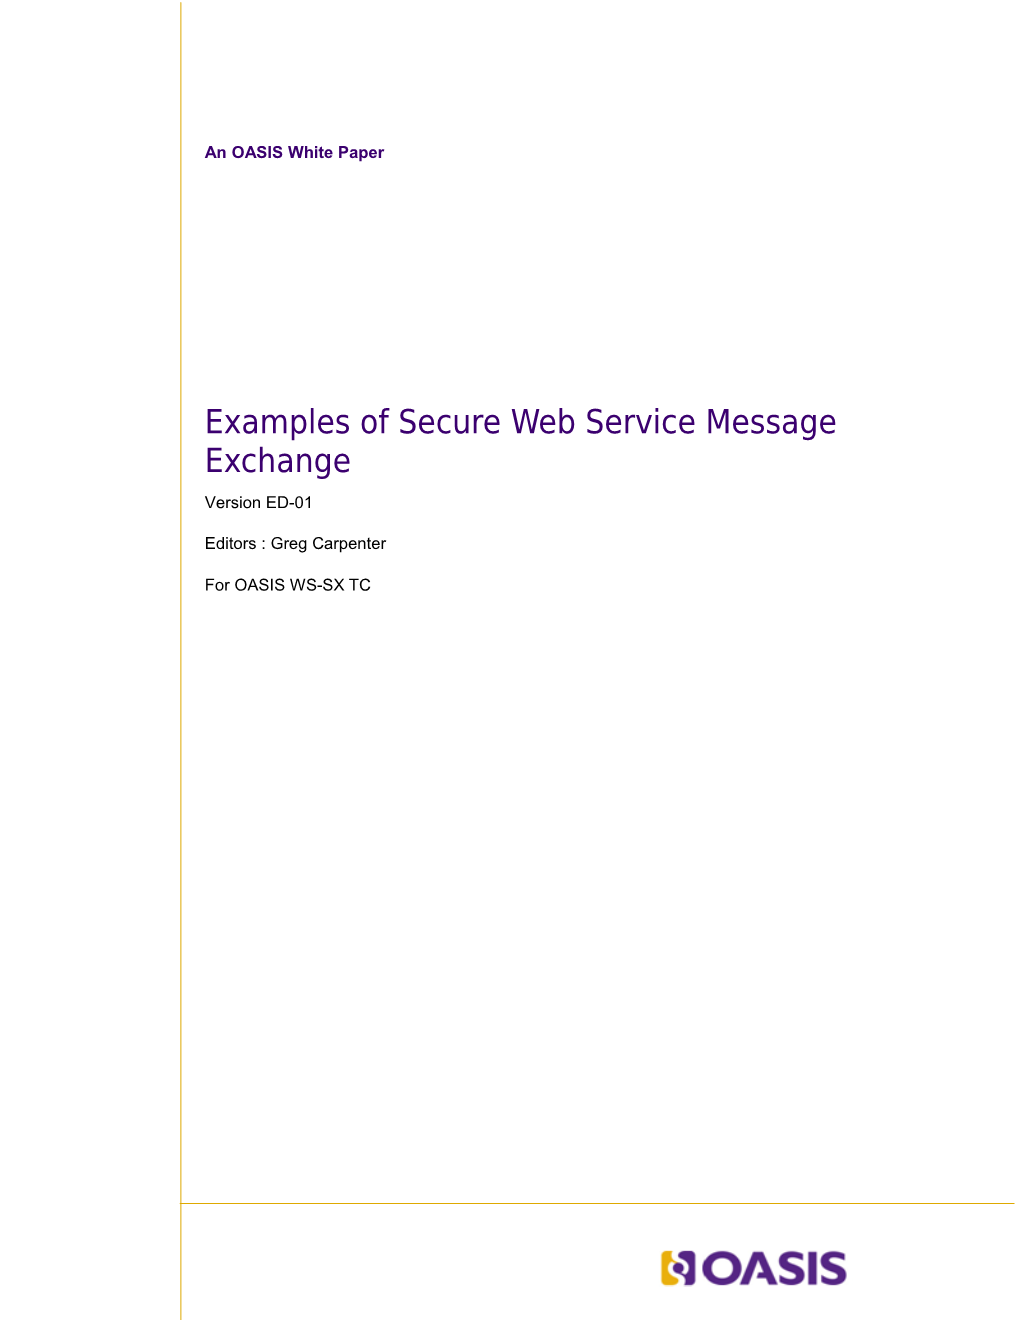 Examples of Secure Web Service Message Exchange